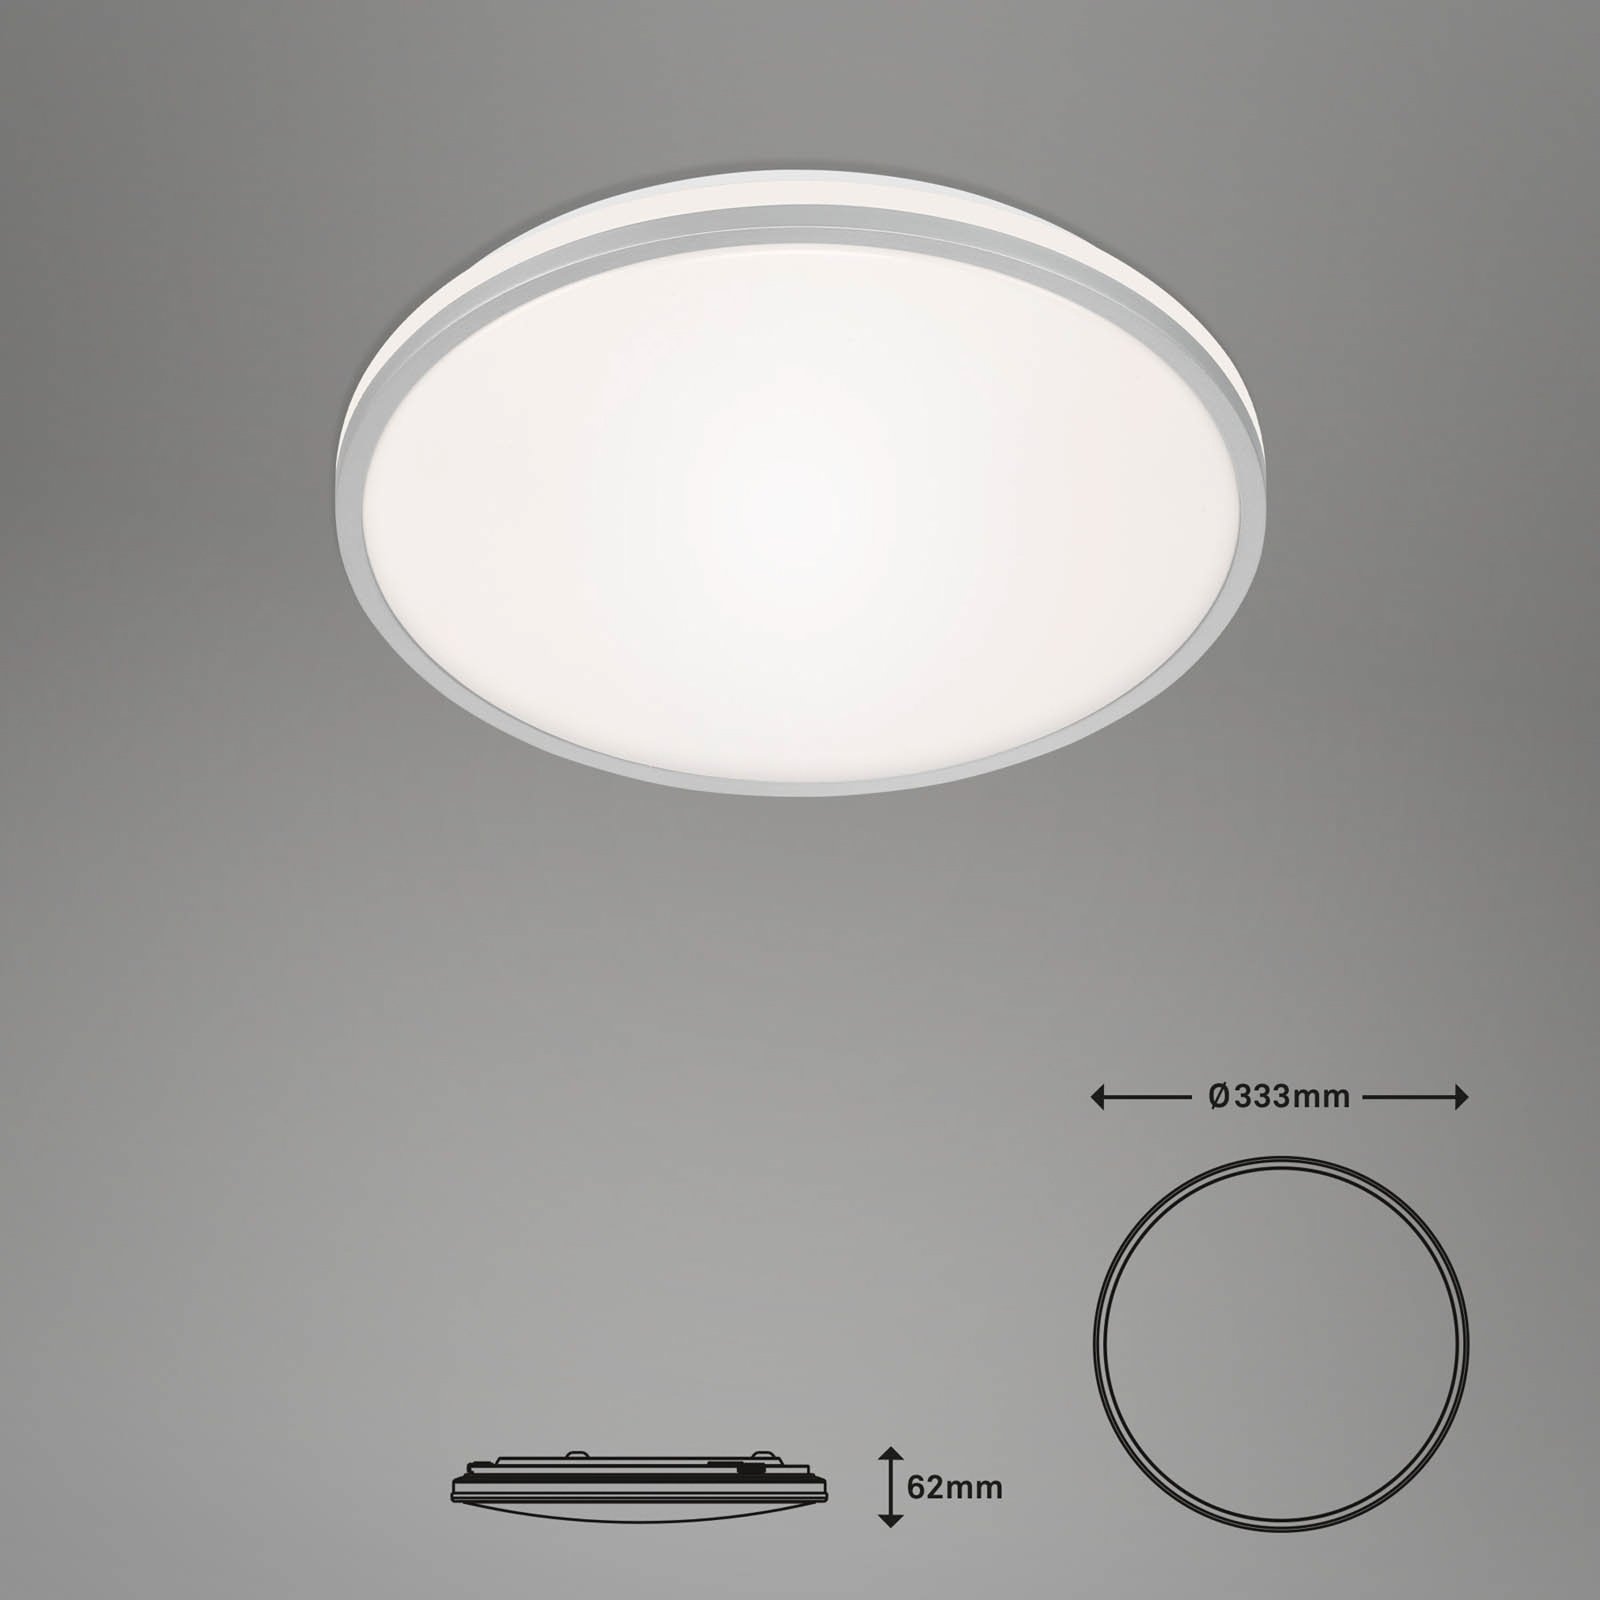 LED ceiling lamp Ivy S, dimmable, CCT, Ø 33 cm